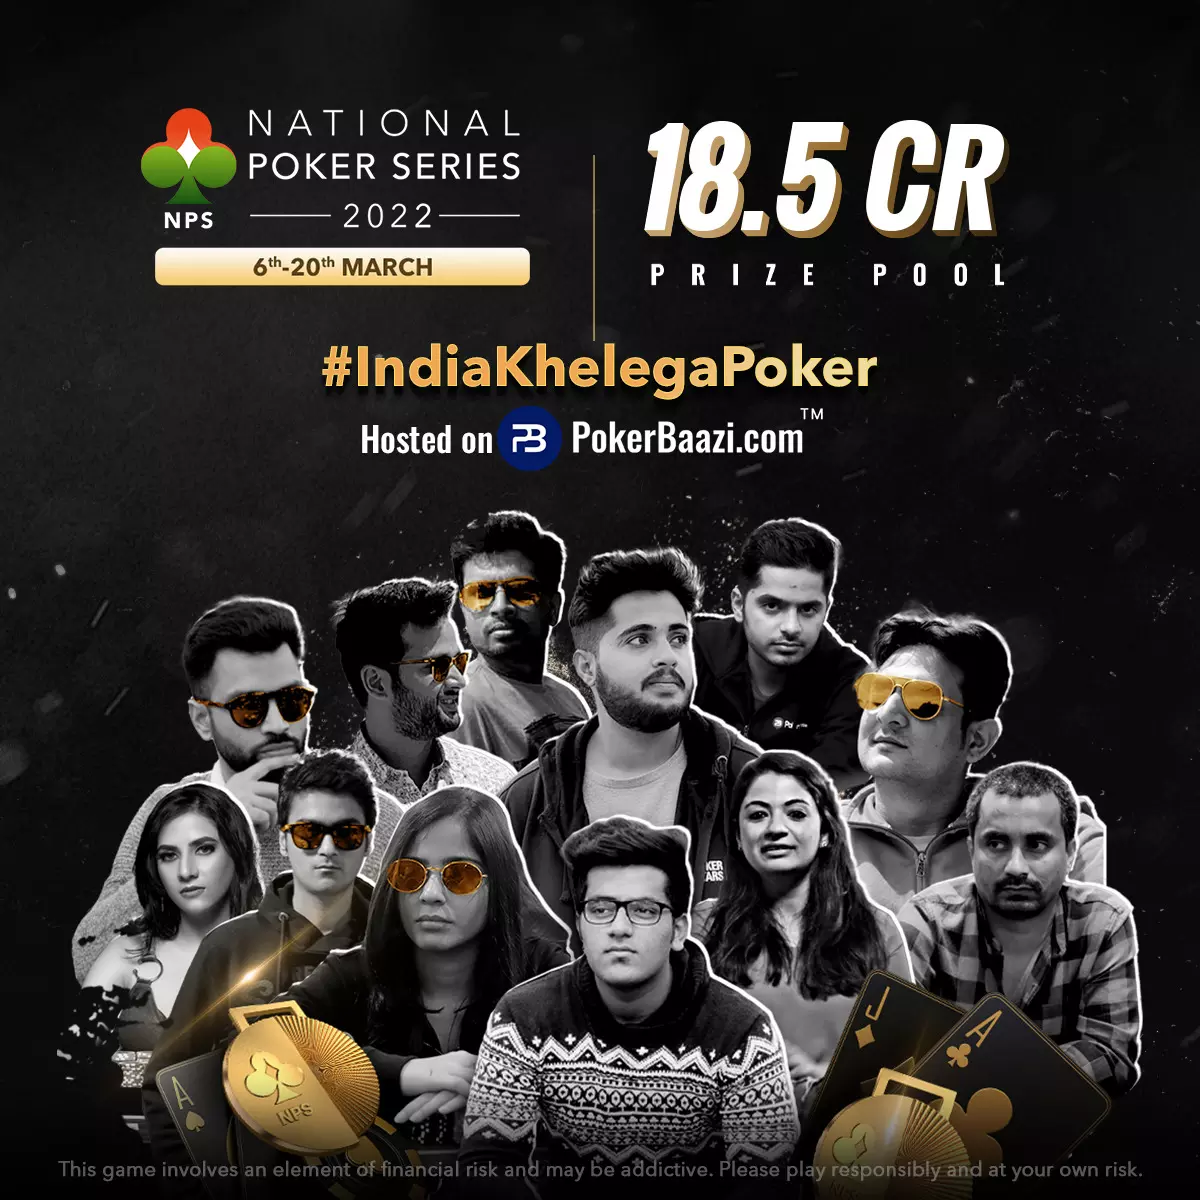 The rise and rise of Poker in India